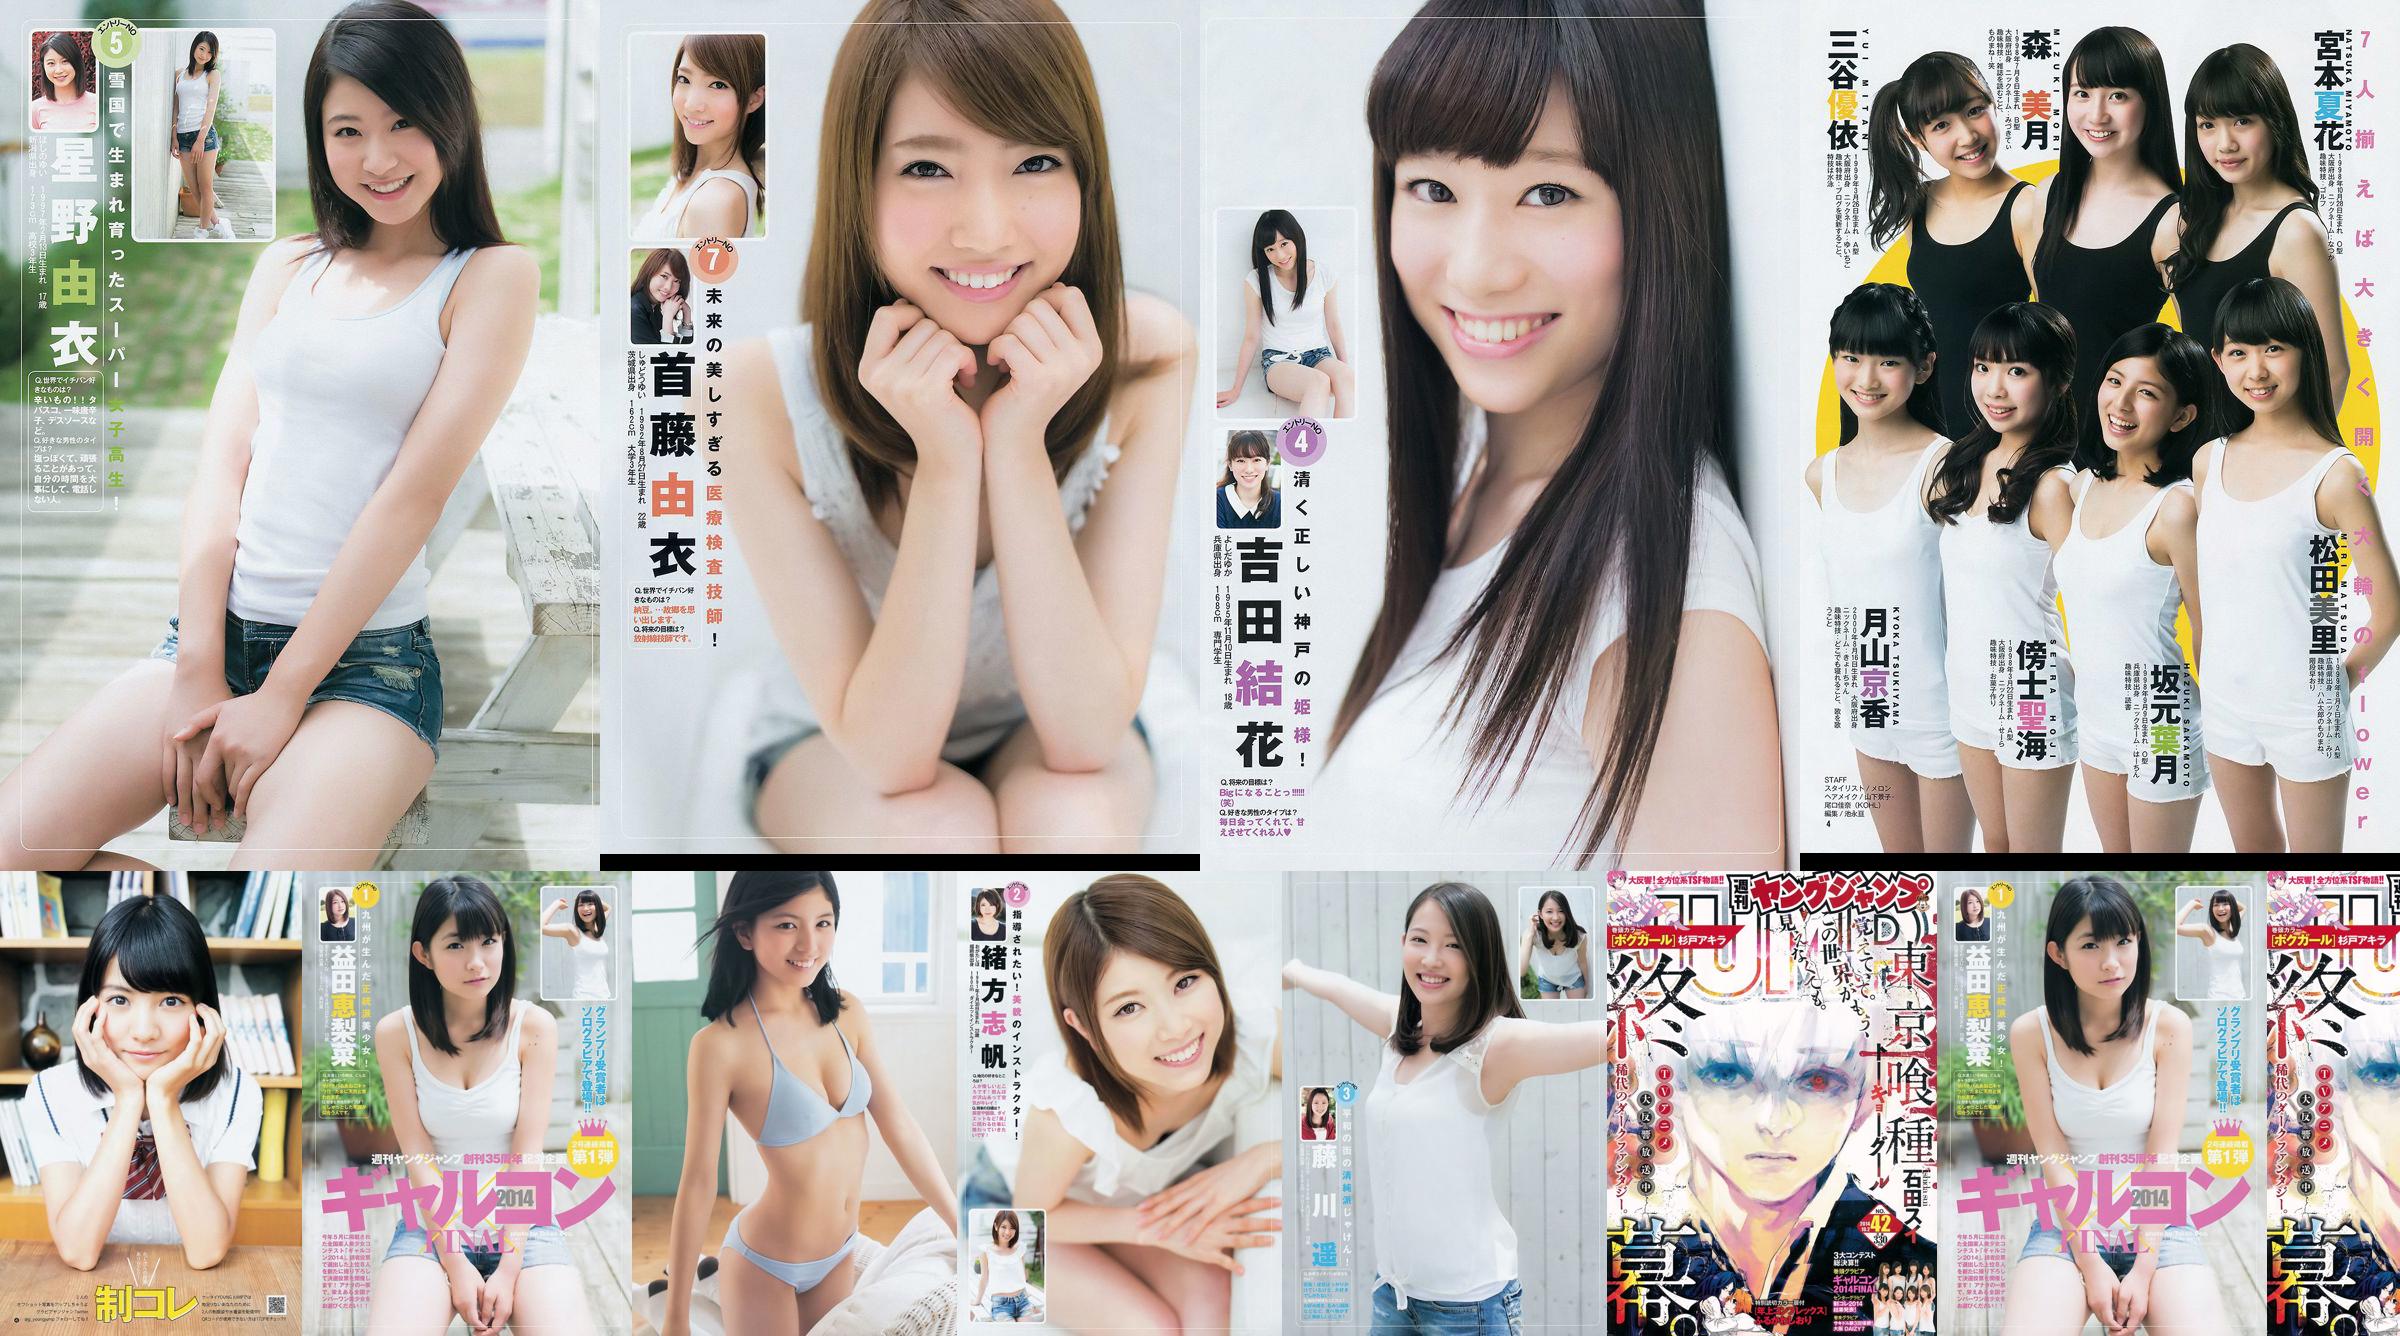 Galcon 2014 System Collection Ultimate 2014 Osaka DAIZY7 [Weekly Young Jump] 2014 No.42 Photo No.db92fe Page 13